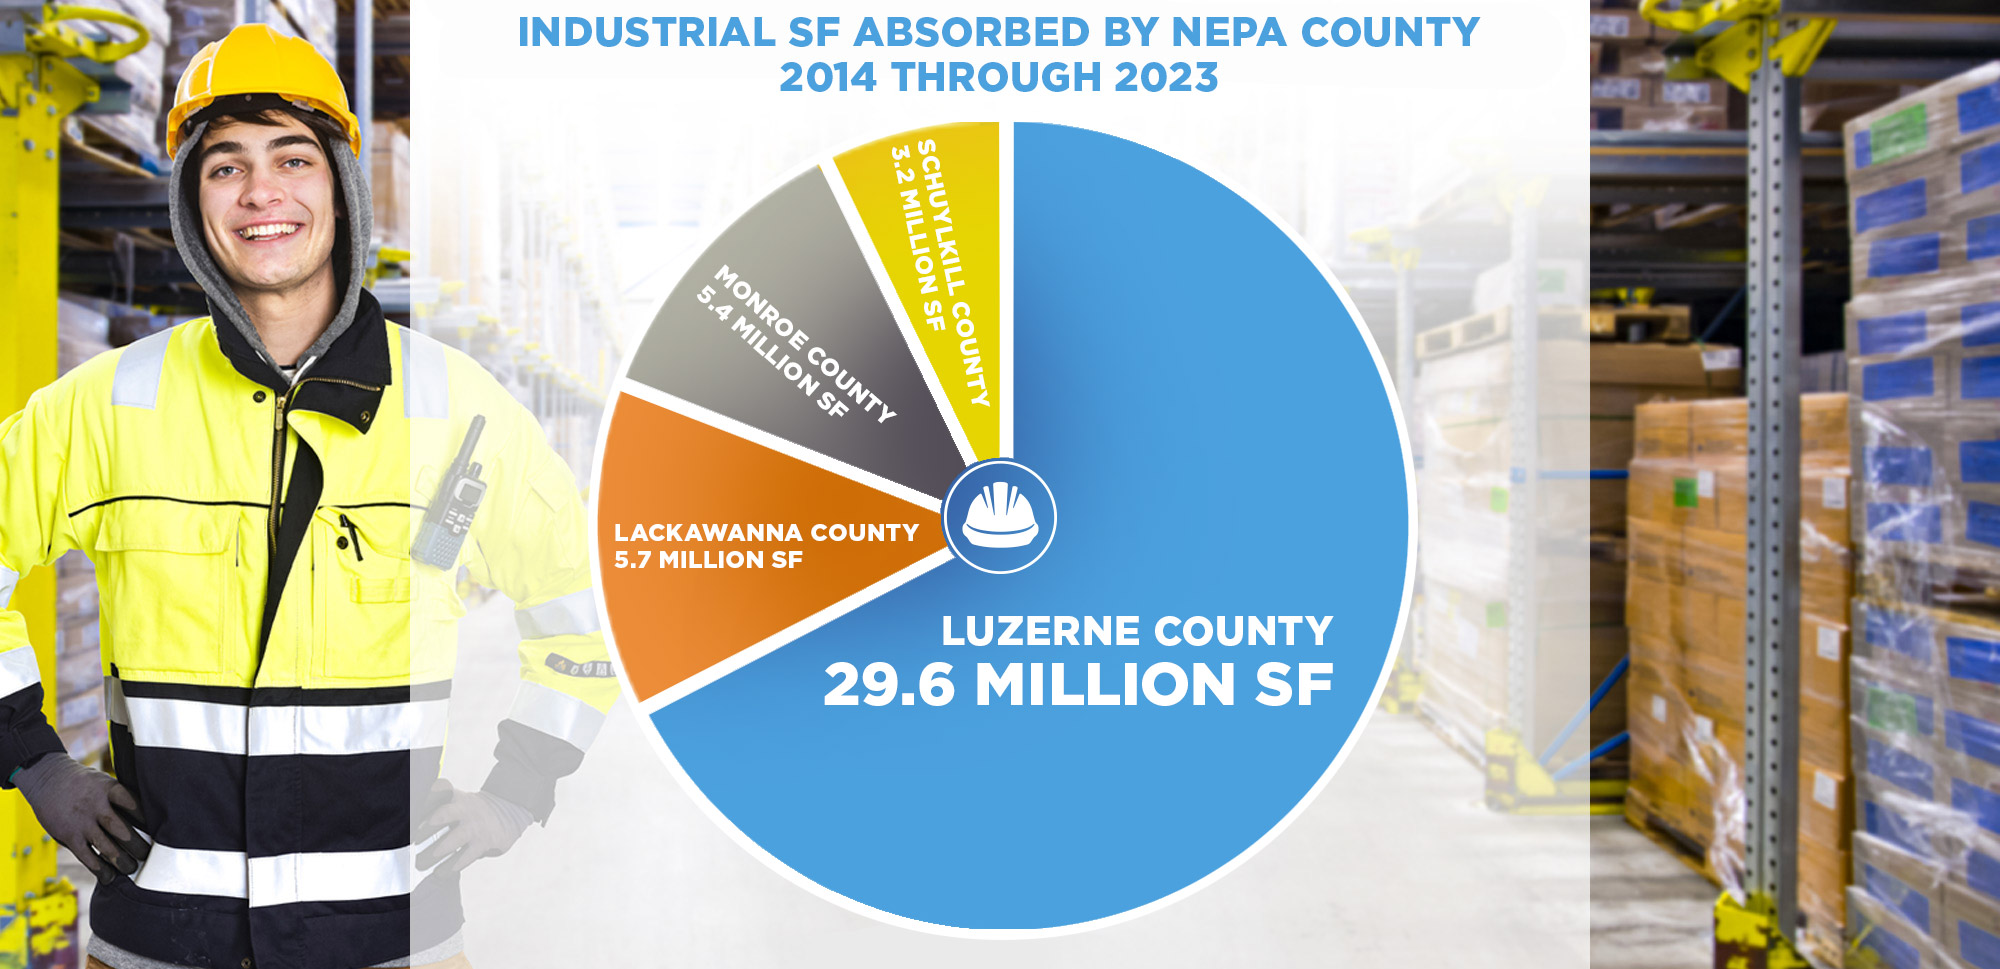 SF of industrial space has been absorbed in NEPA